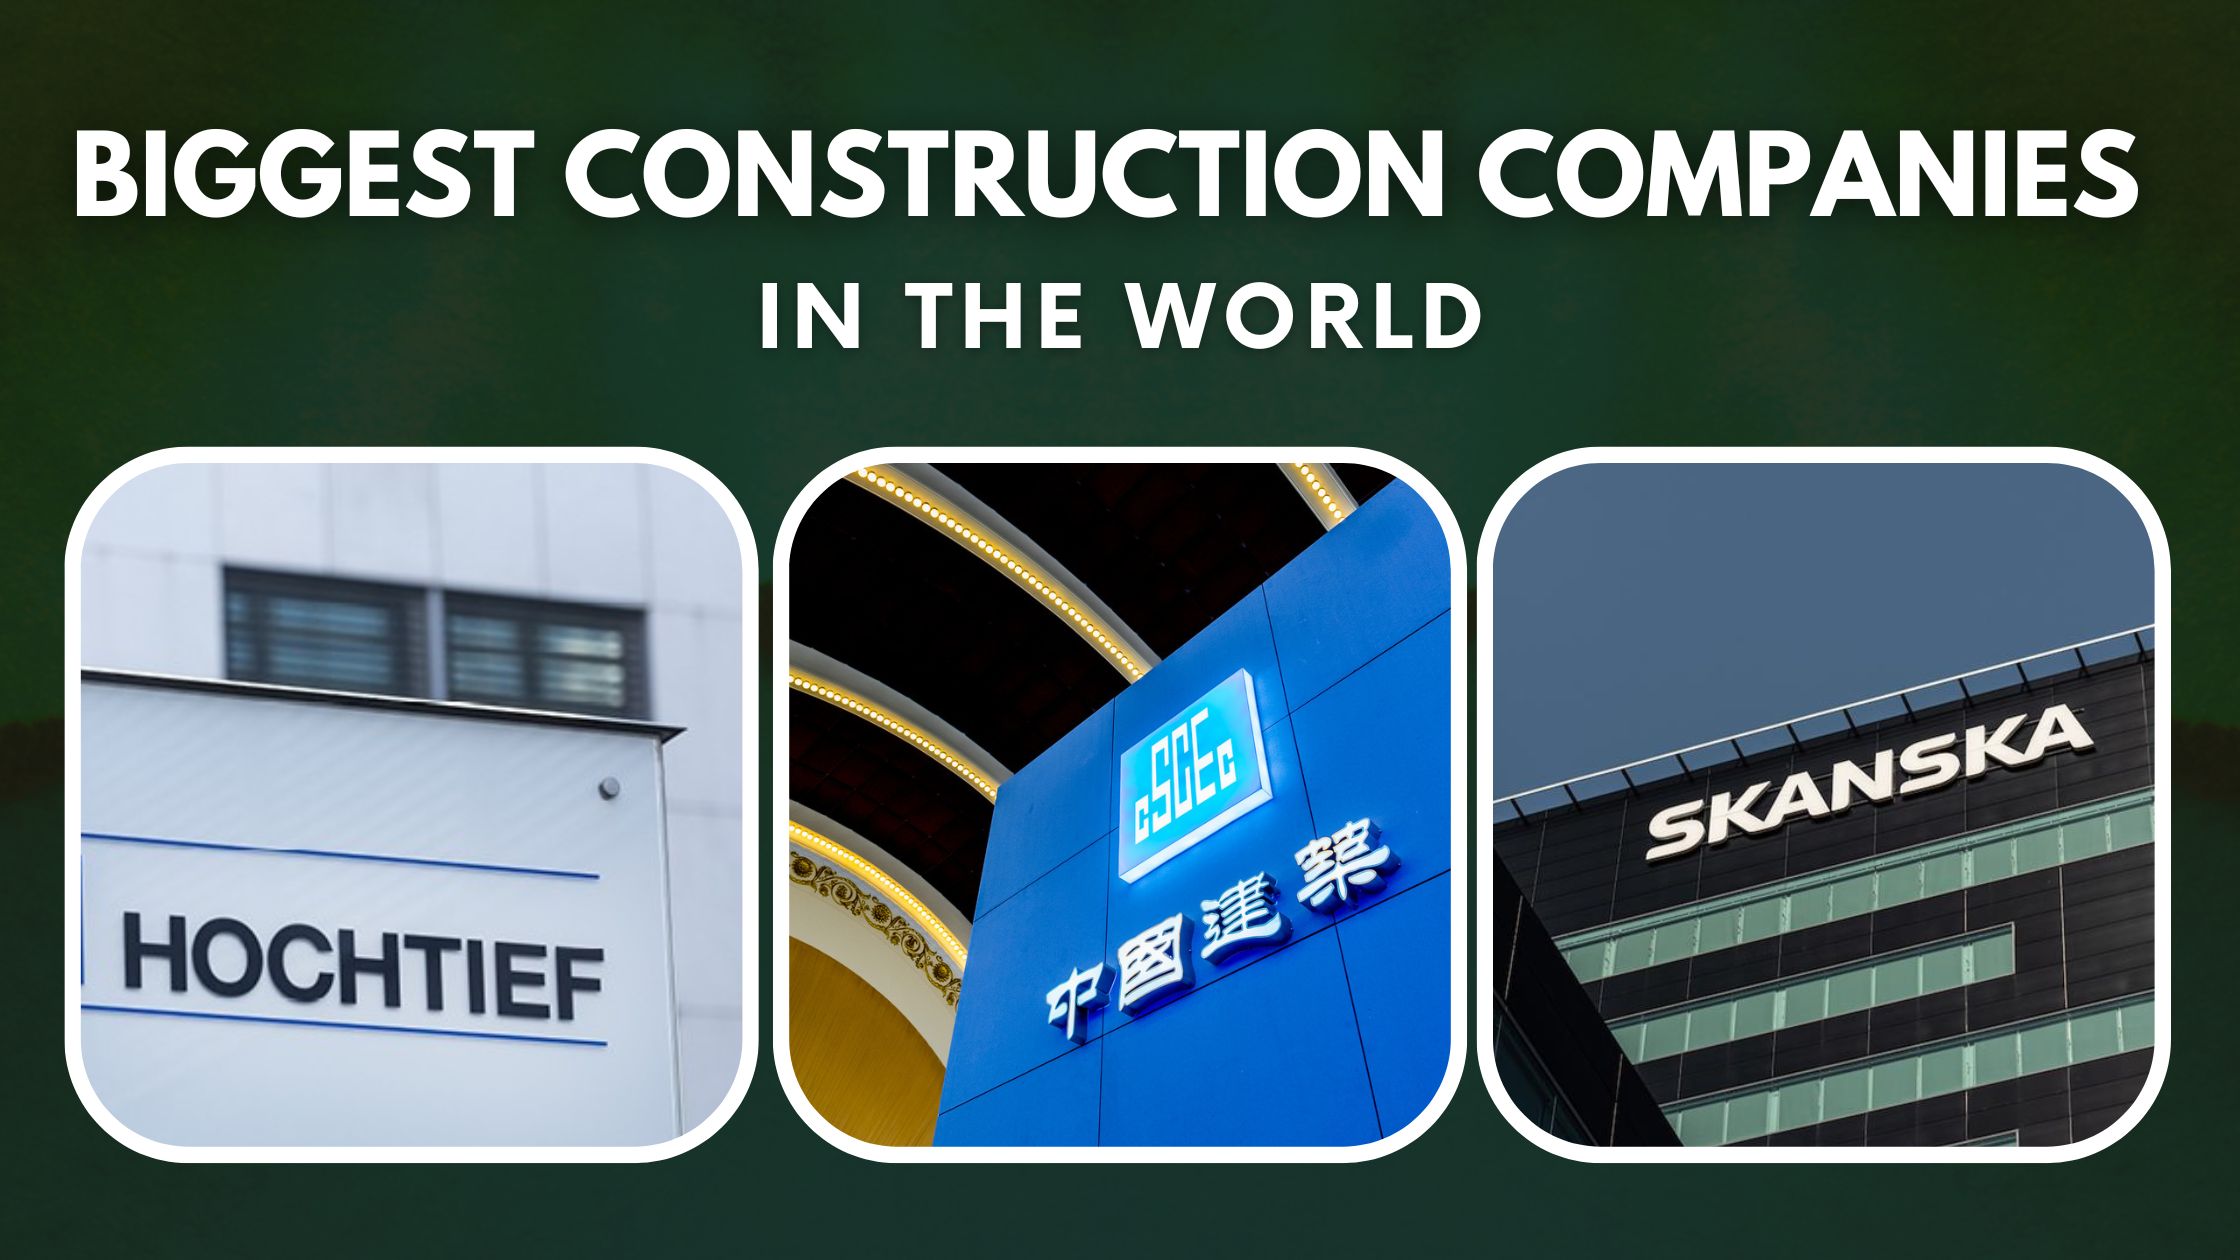 Top construction companies in the world